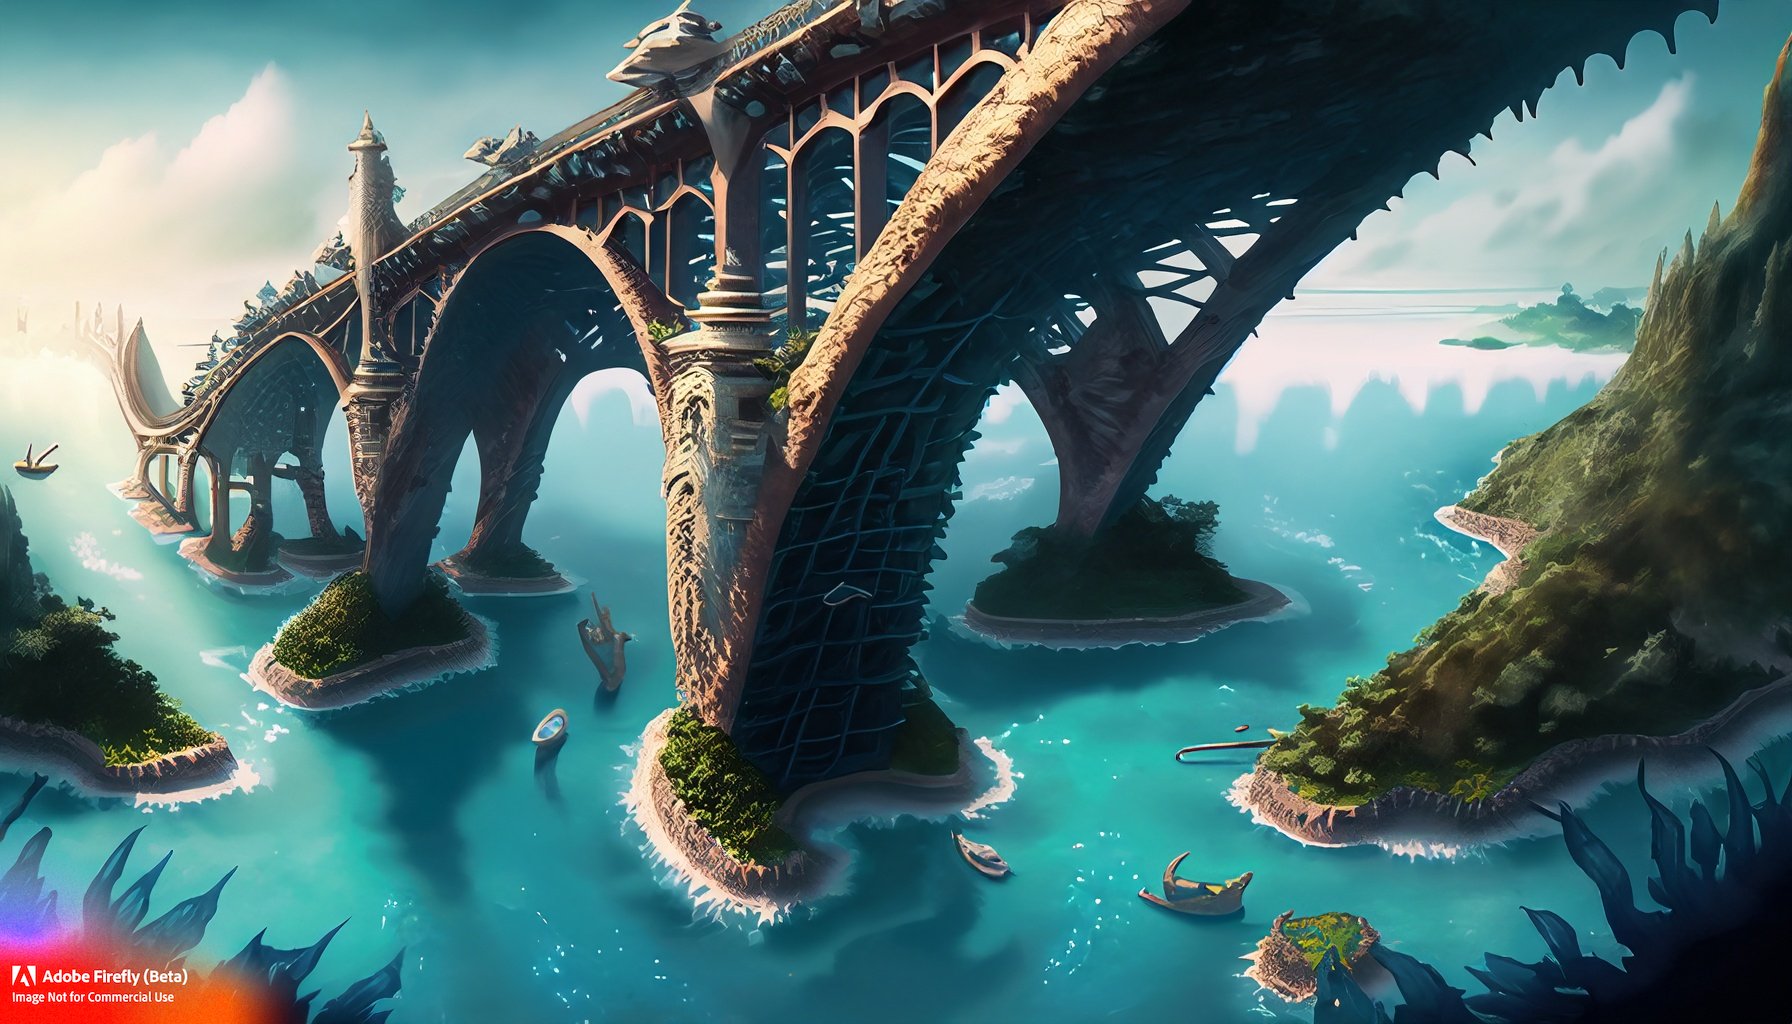 Firefly_A+Bridge Kingdom, a massive enclosed fantasy bridge over a sea, there are sharks in the sea, tropical islands are at different points along the bridge._art,fantasy,shot_from_above_44916.jpg